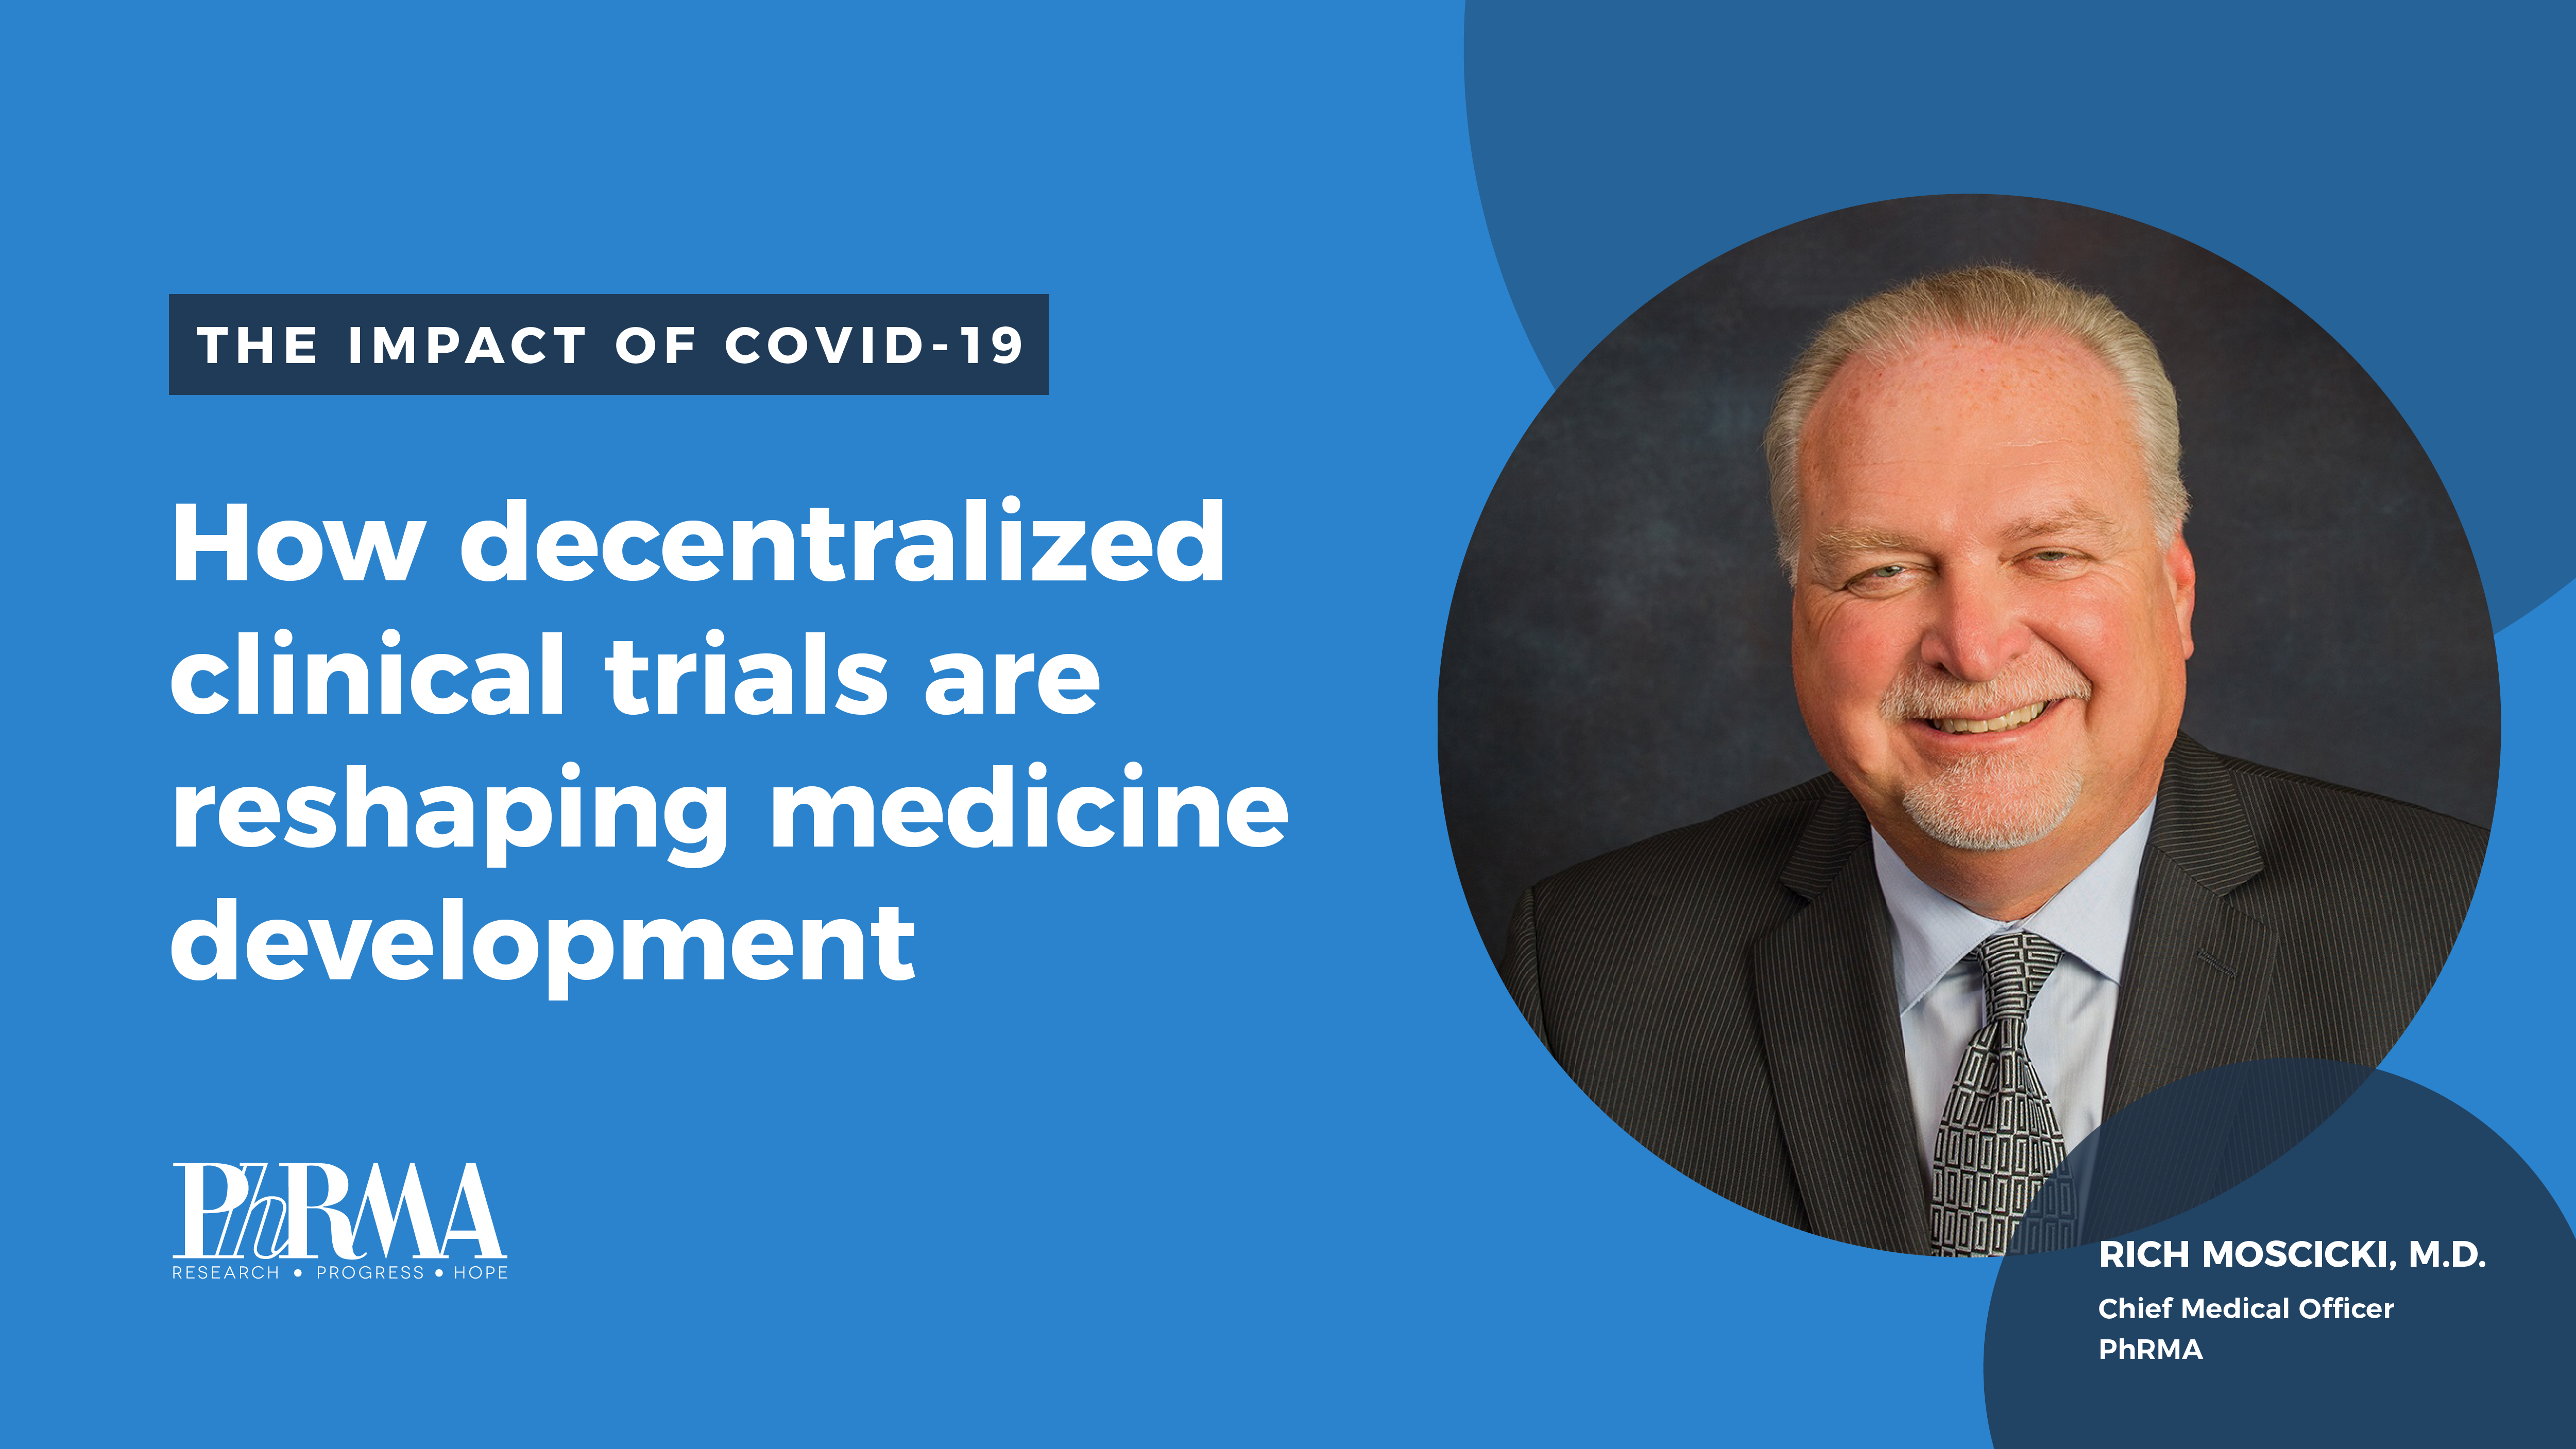 Lessons learned from COVID-19: The way we develop new medicines is changing